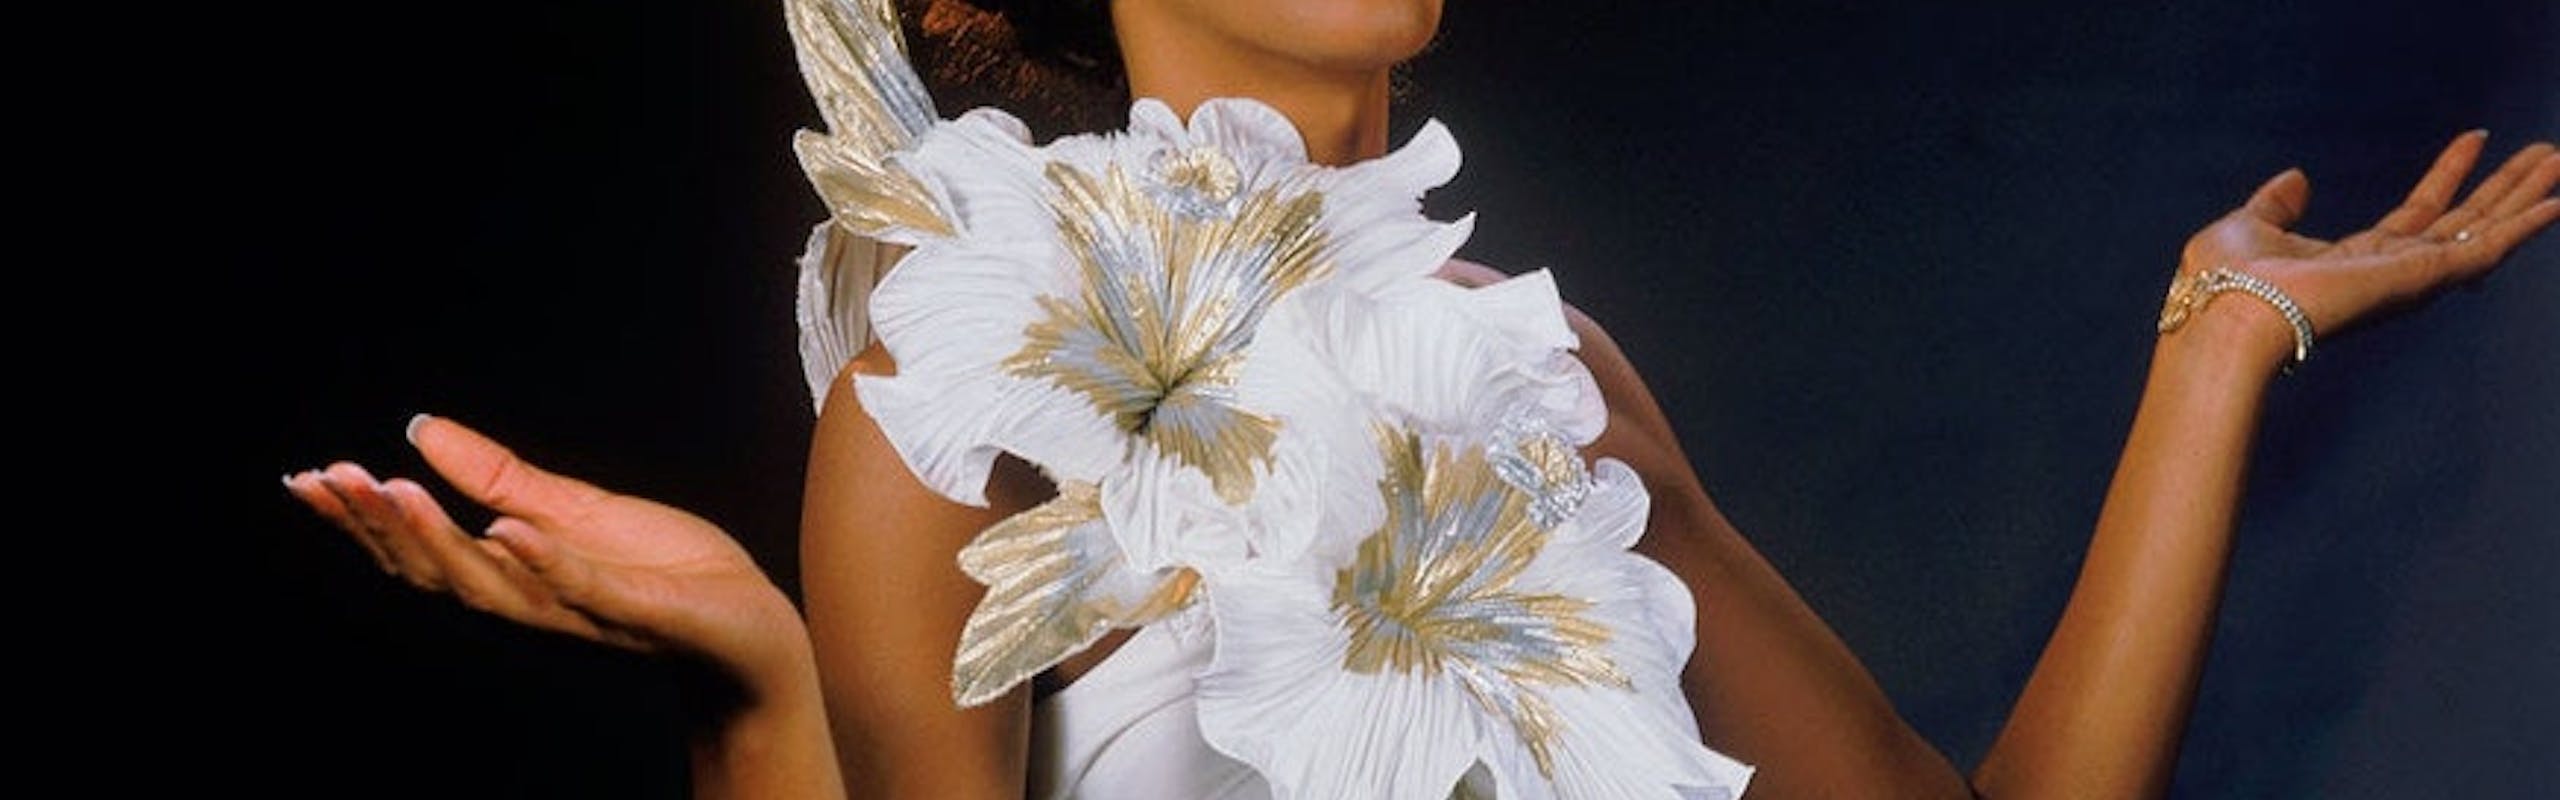 Houston posing while wearing a white dress with a large white flower